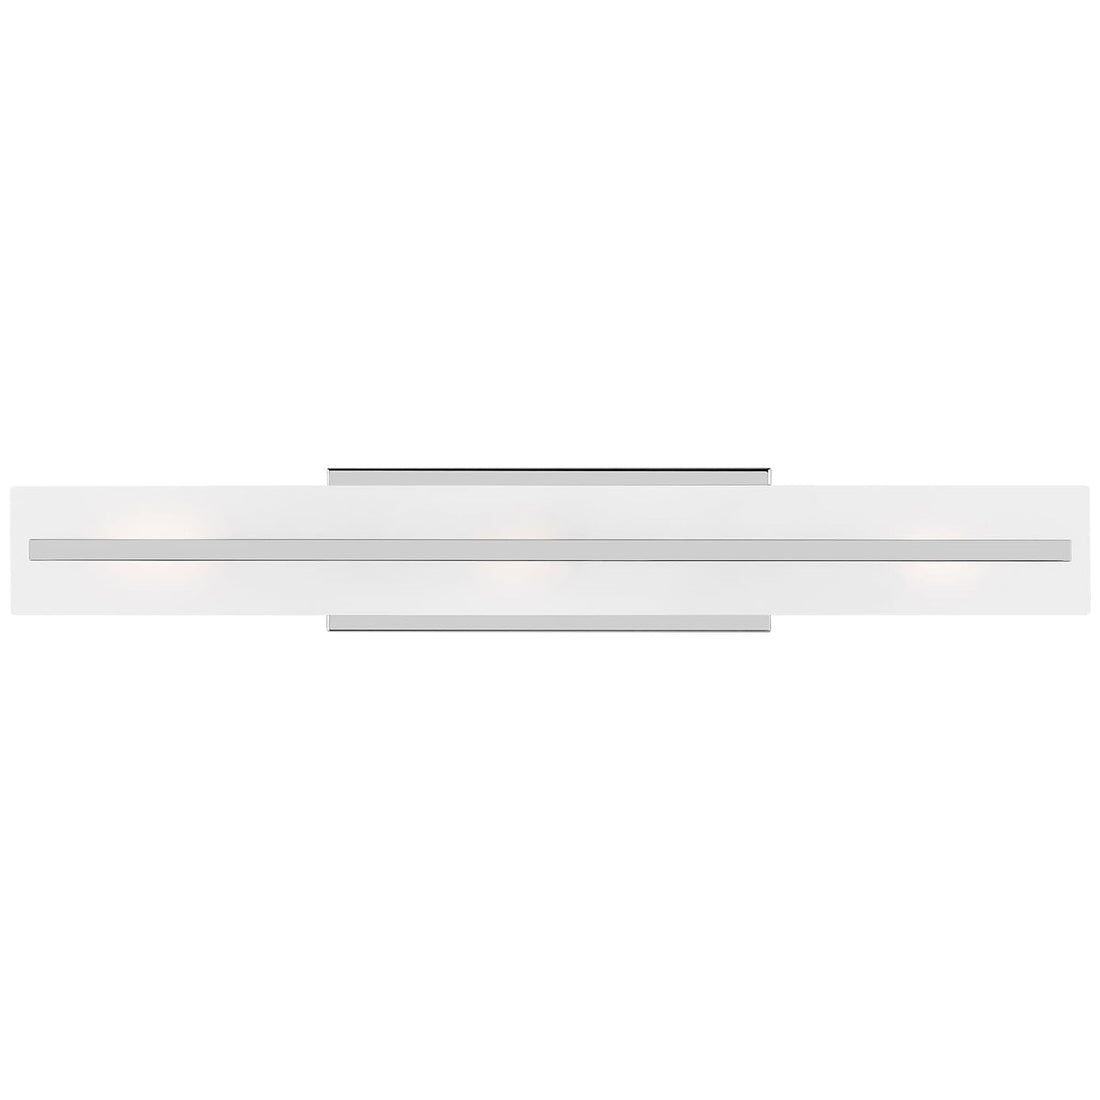 Sea Gull Lighting Dex 3-Light Wall/Bath Sconce without Bulb